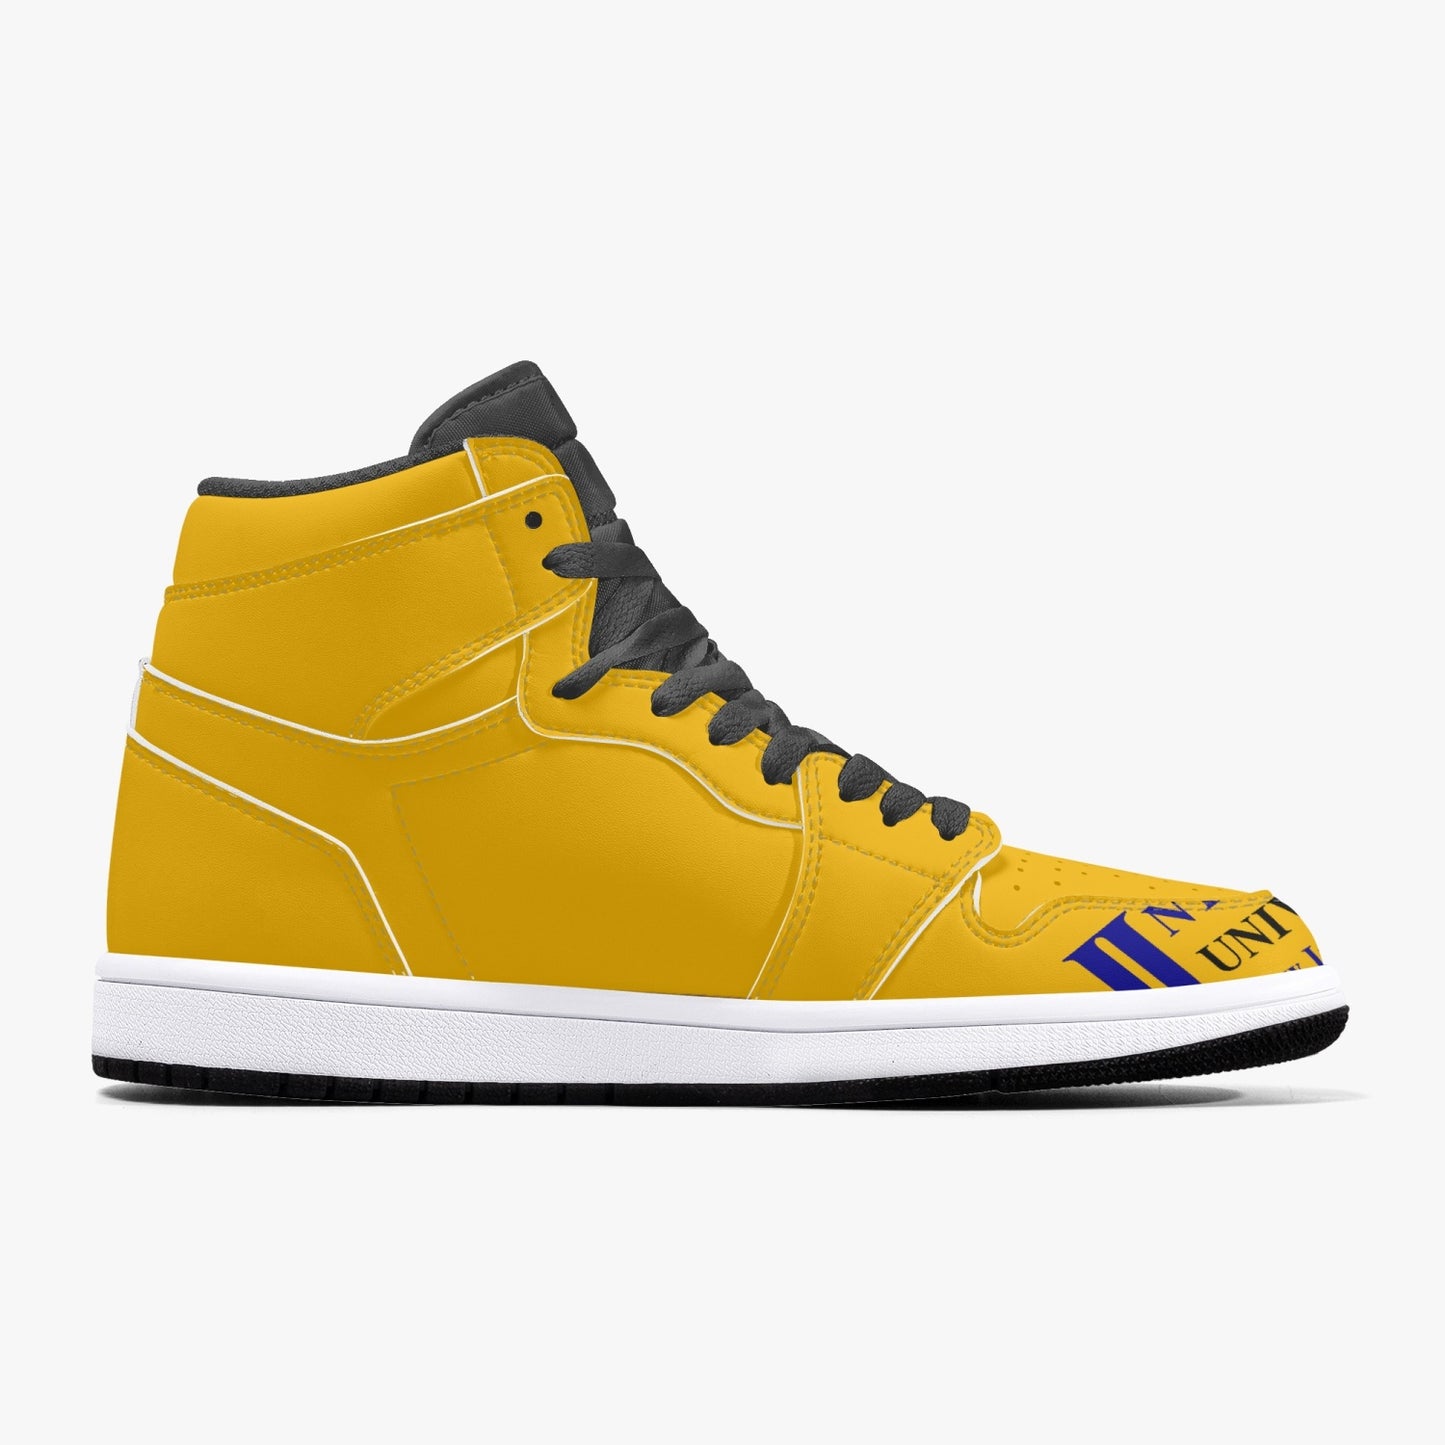 352. Interfaith University New Black High-Top Leather Sneakers